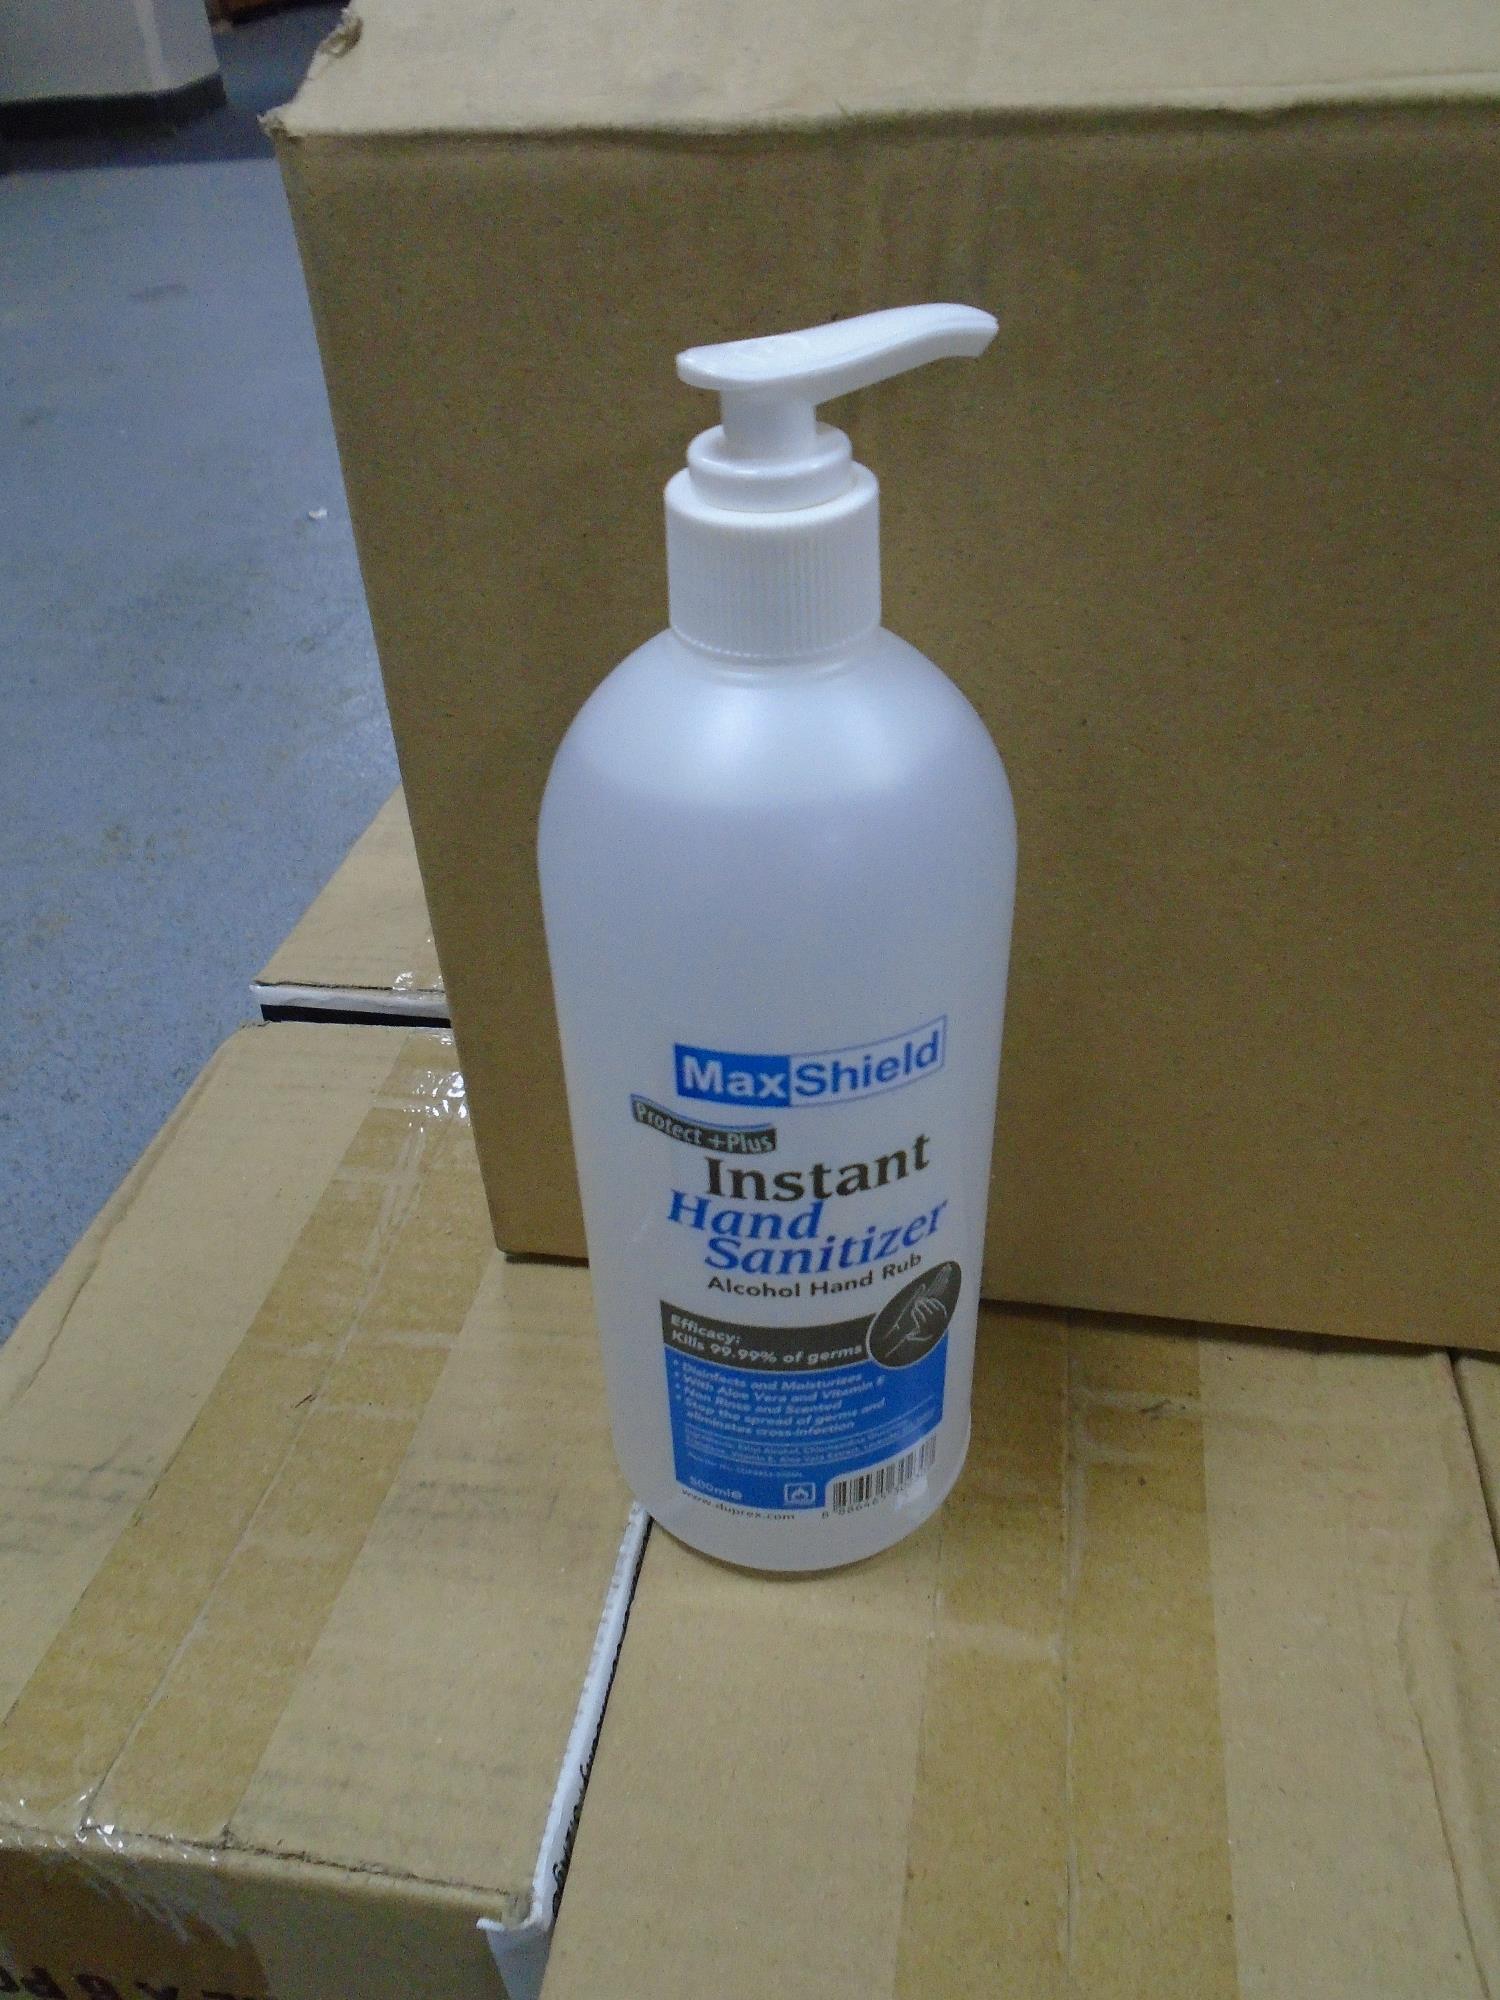 A crate containing 10 boxes of MaxShield hand sanitizer. - Image 2 of 2